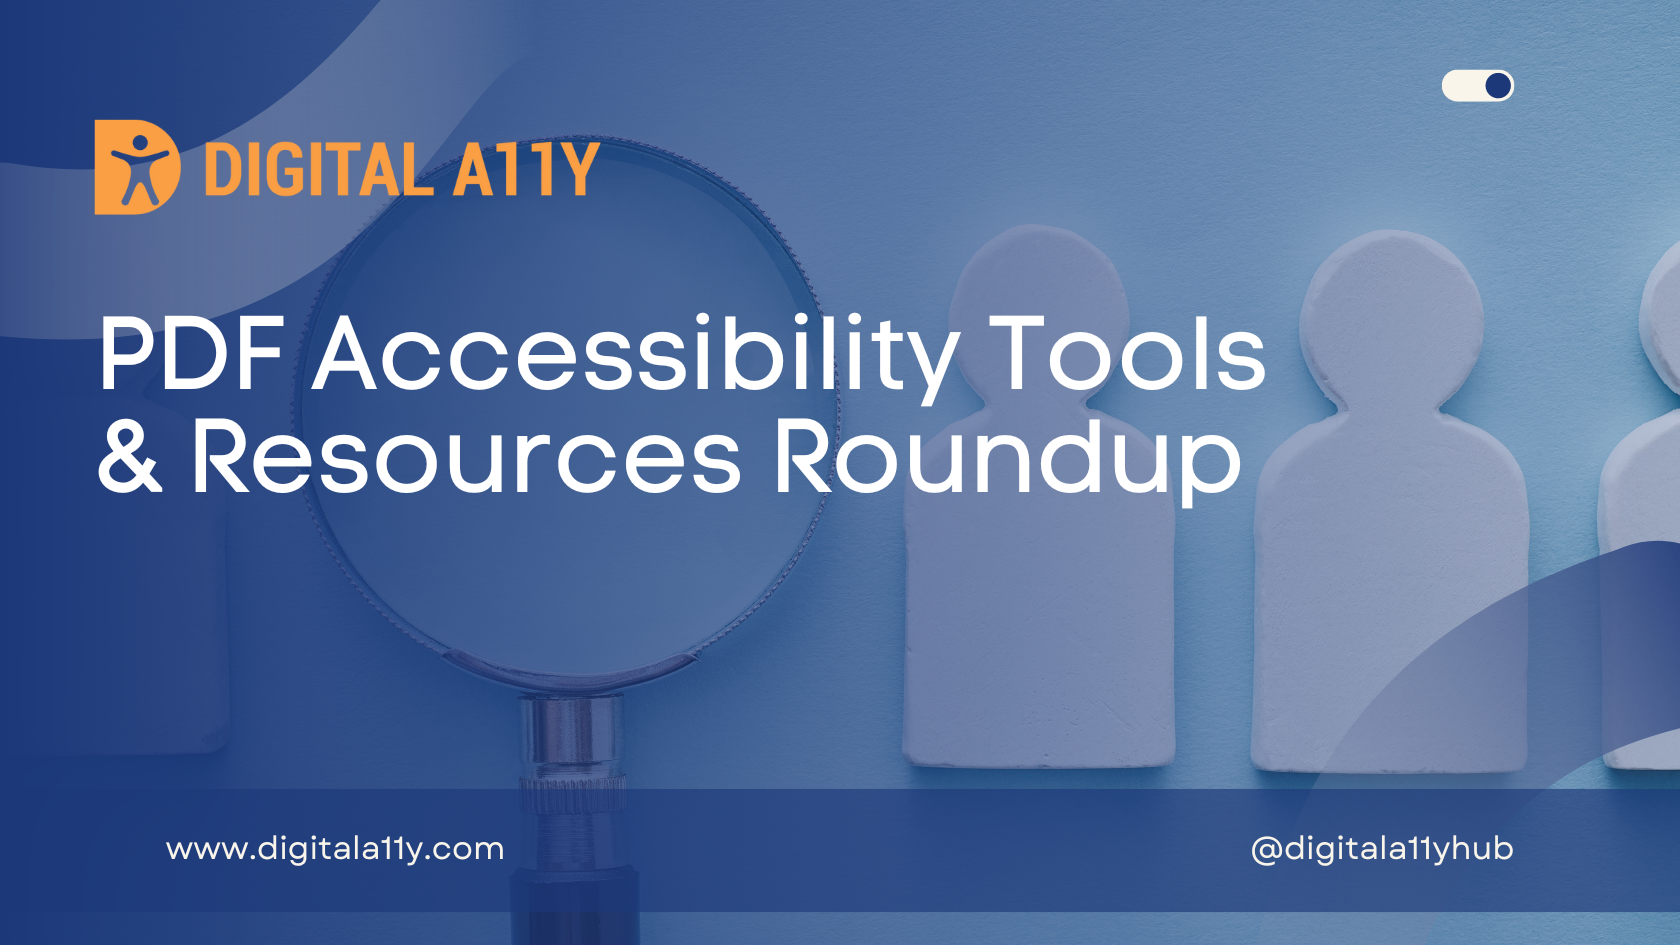 PDF Accessibility Tools & Resources Roundup